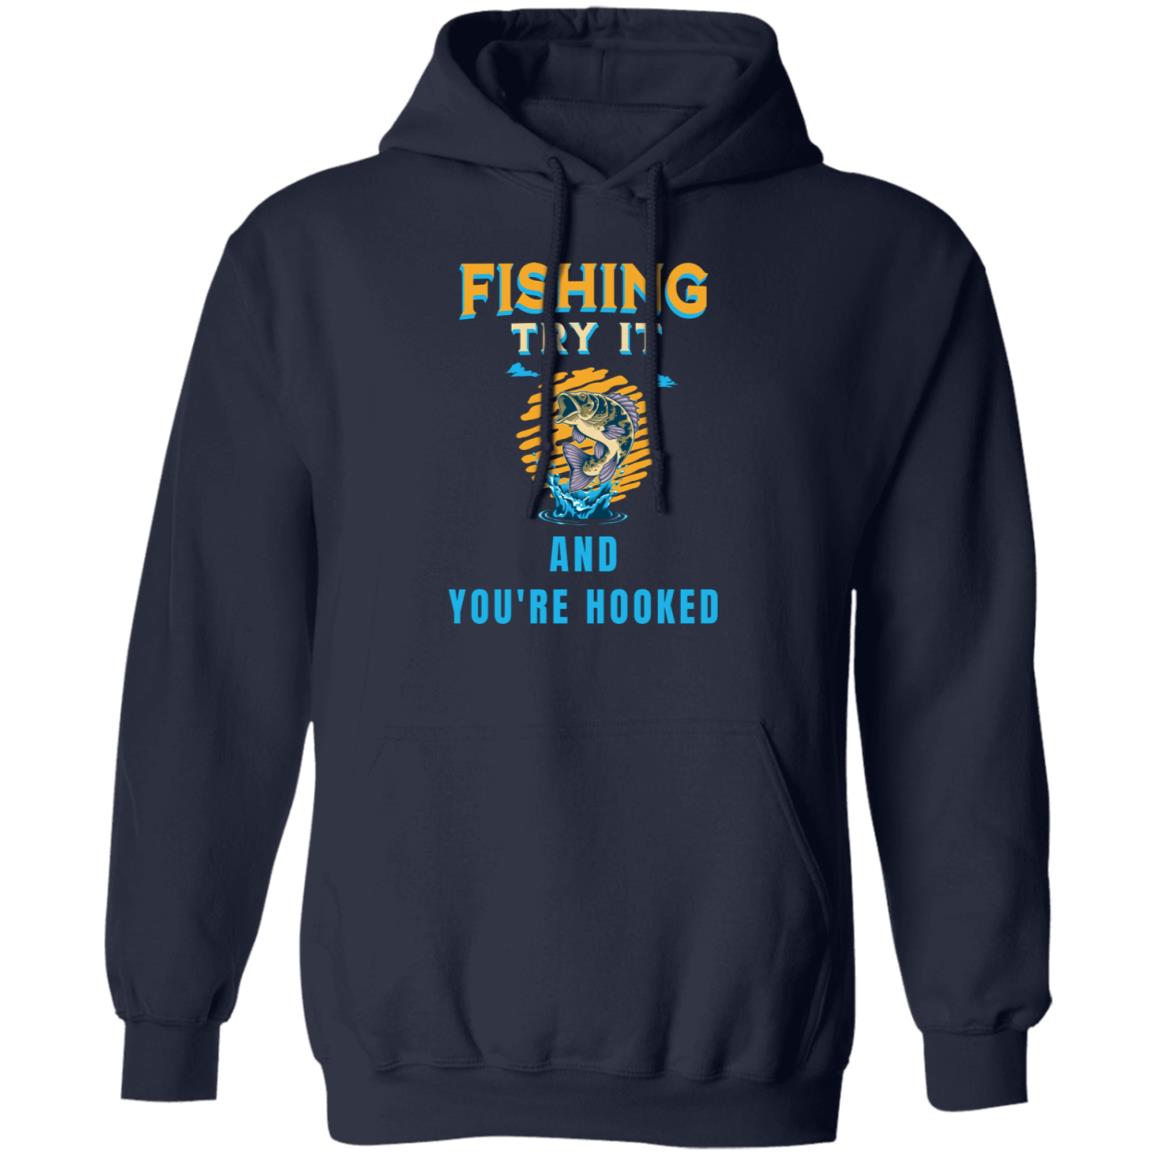 Fishing try it and you're hooked k hoodie navy